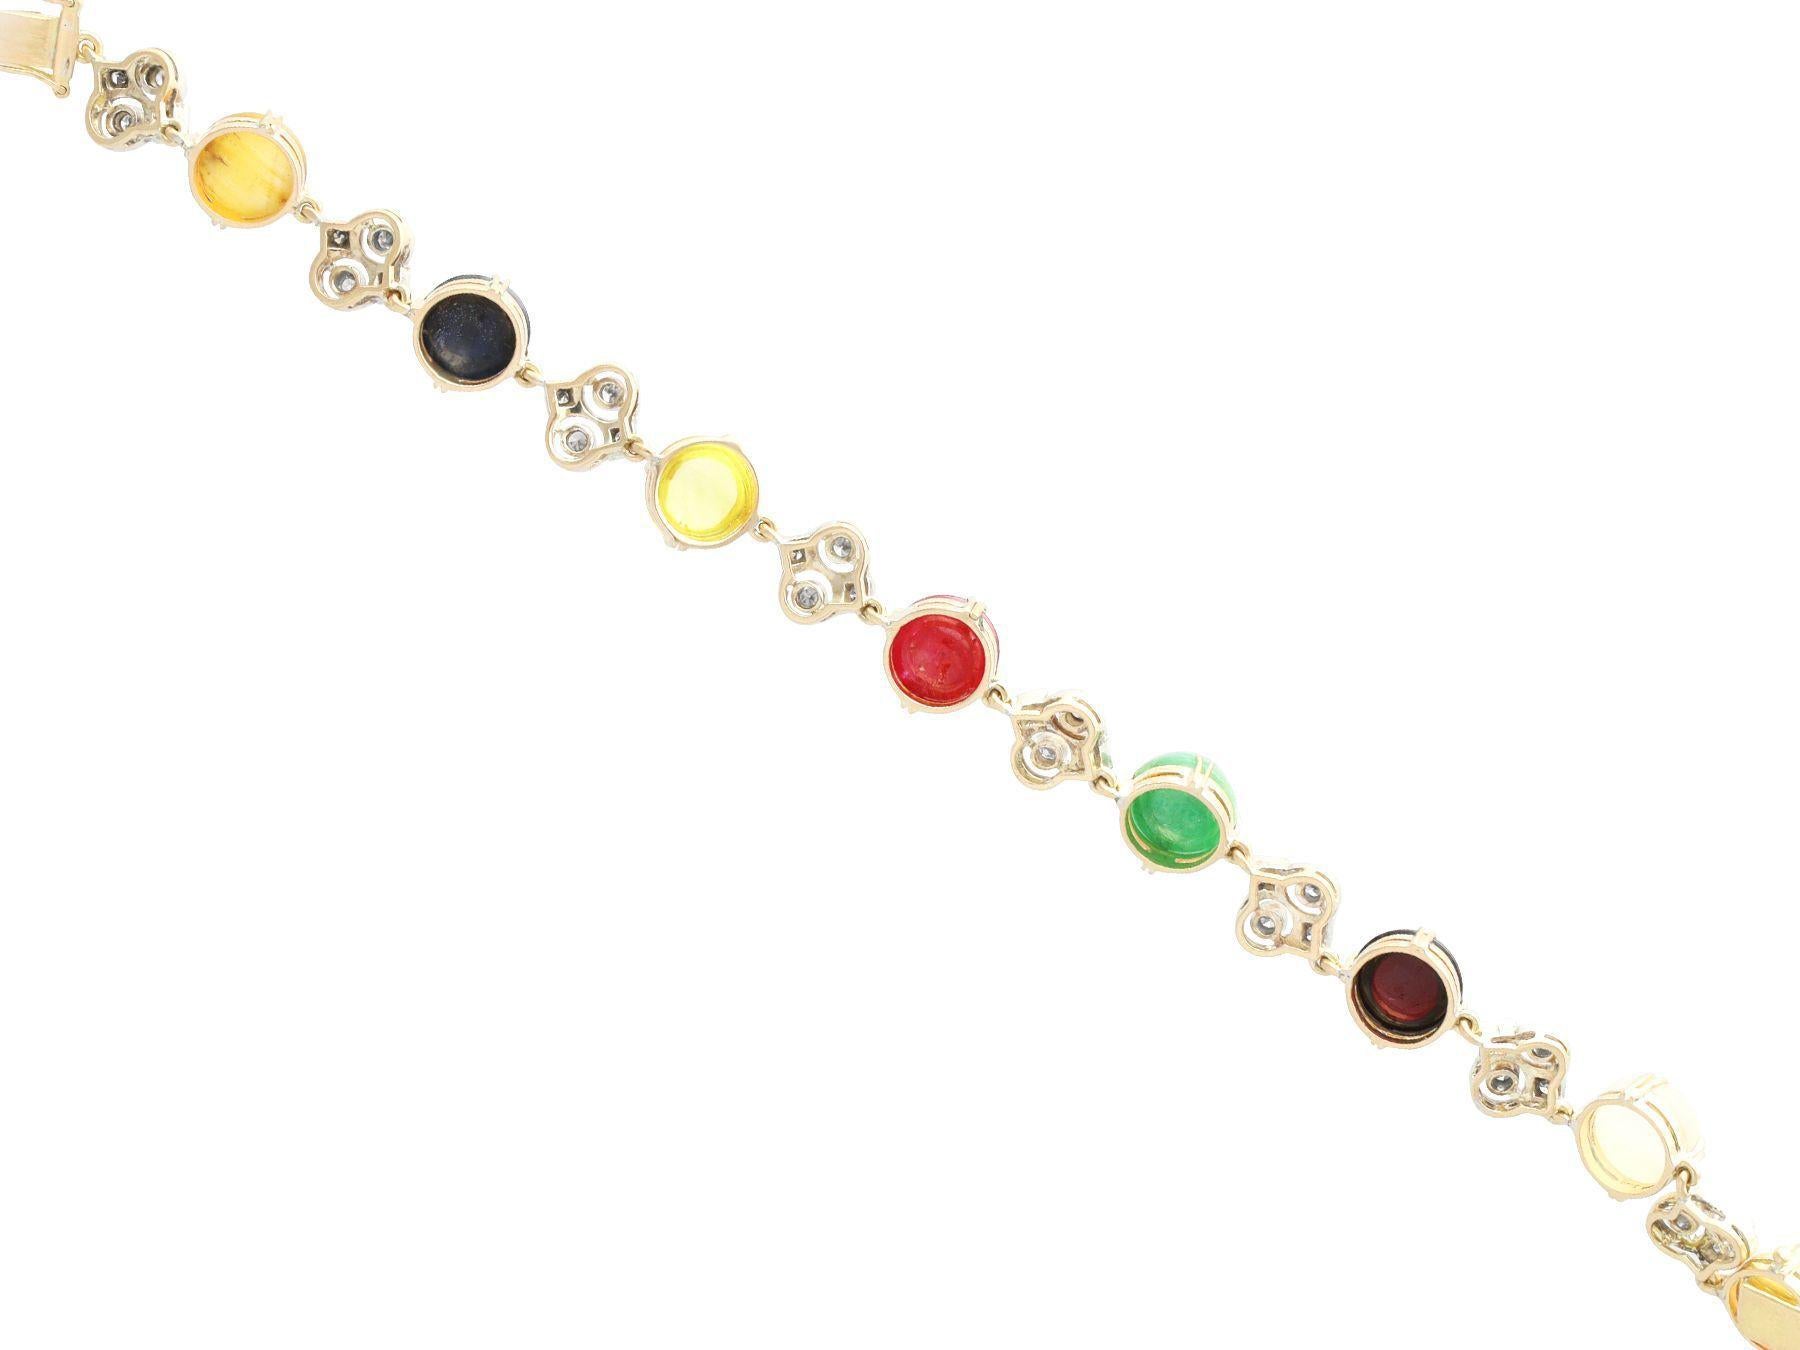 Antique Gemstone and Yellow Gold Bracelet and Pendant Suite In Excellent Condition For Sale In Jesmond, Newcastle Upon Tyne